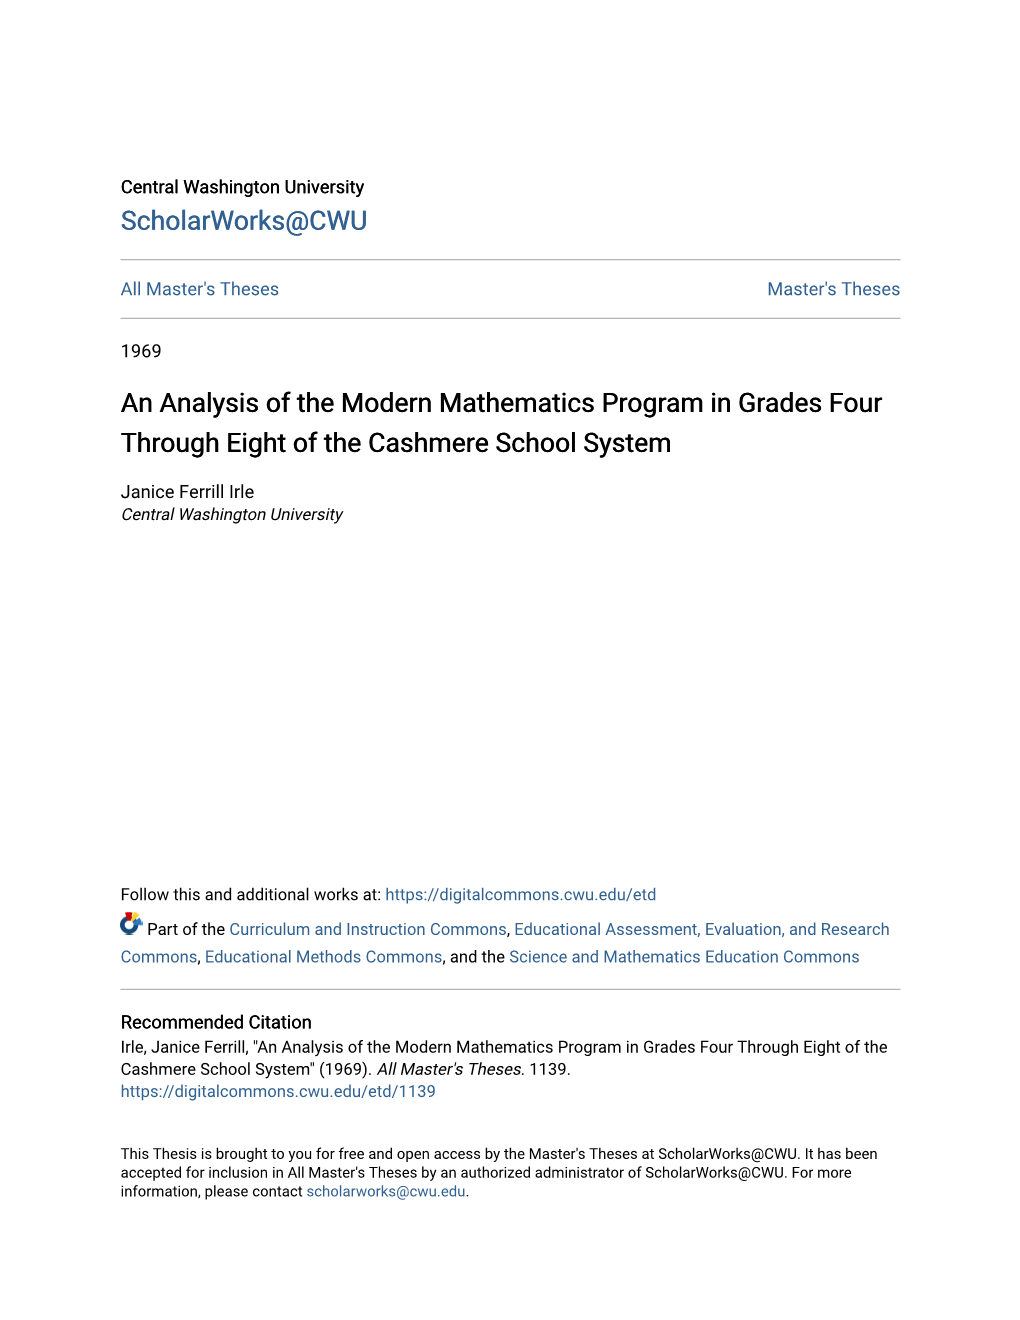 An Analysis of the Modern Mathematics Program in Grades Four Through Eight of the Cashmere School System